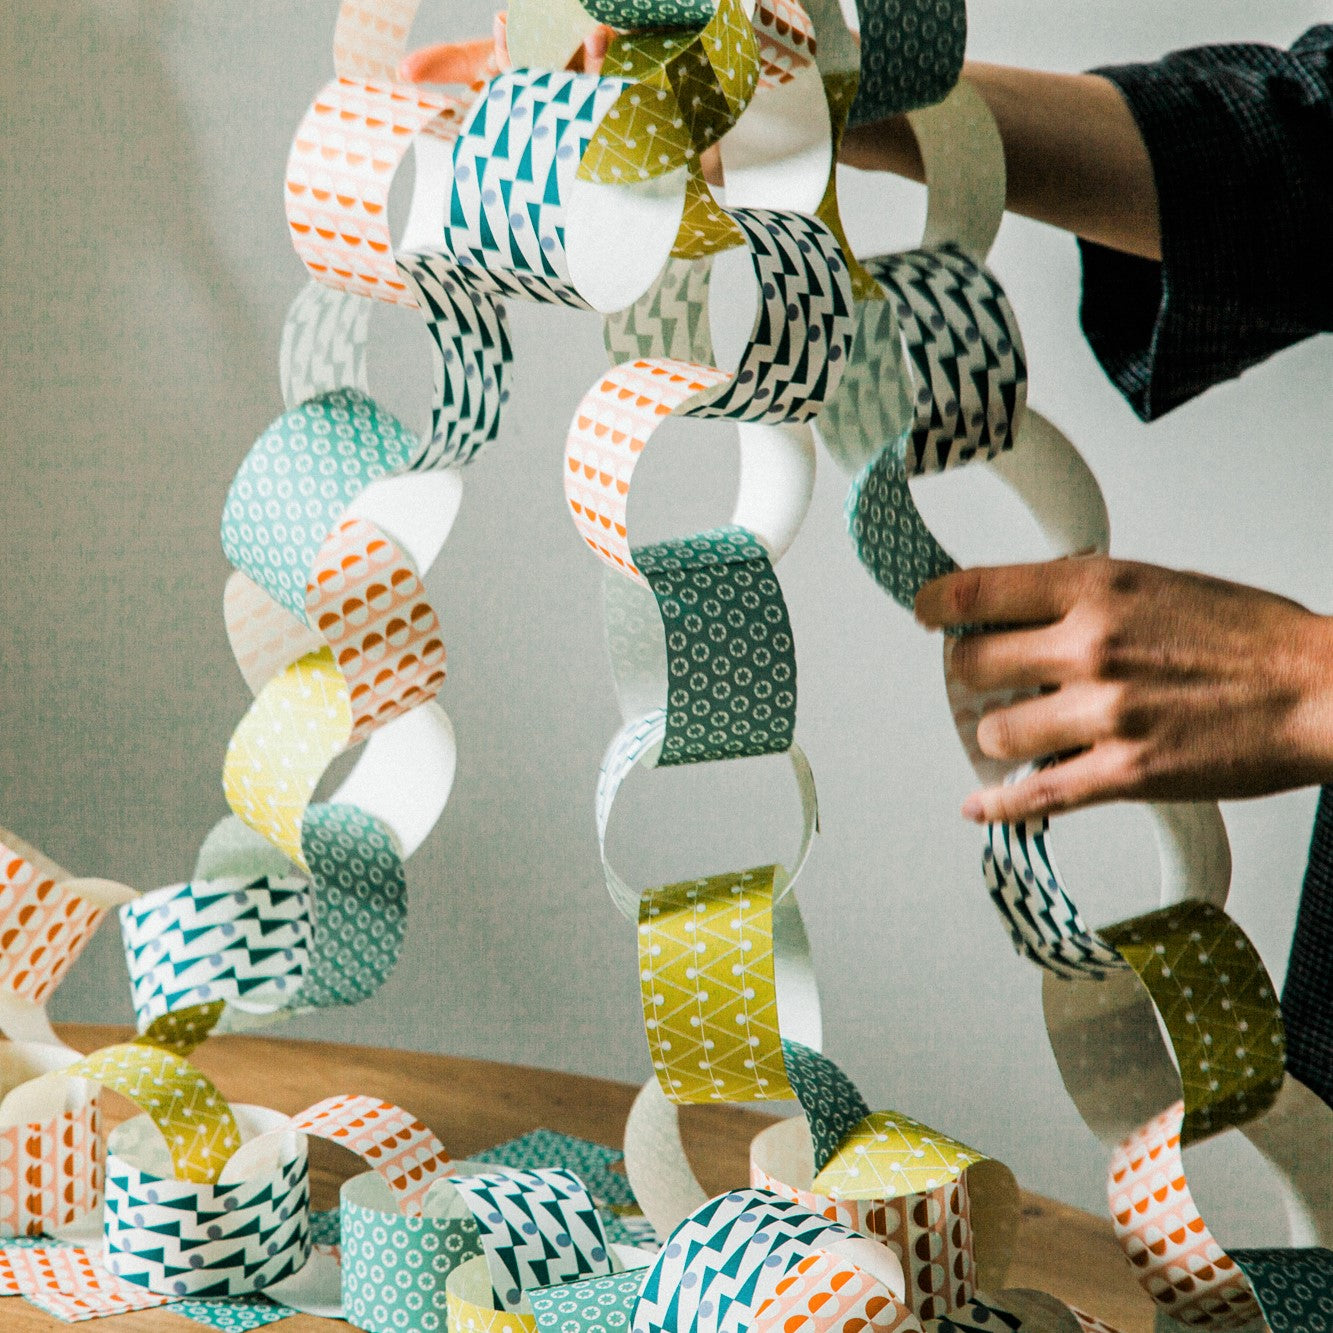 A paperchain of different patterned geometric papers in colours of mustard, orange, aqua and teal, pictured being ready to hang